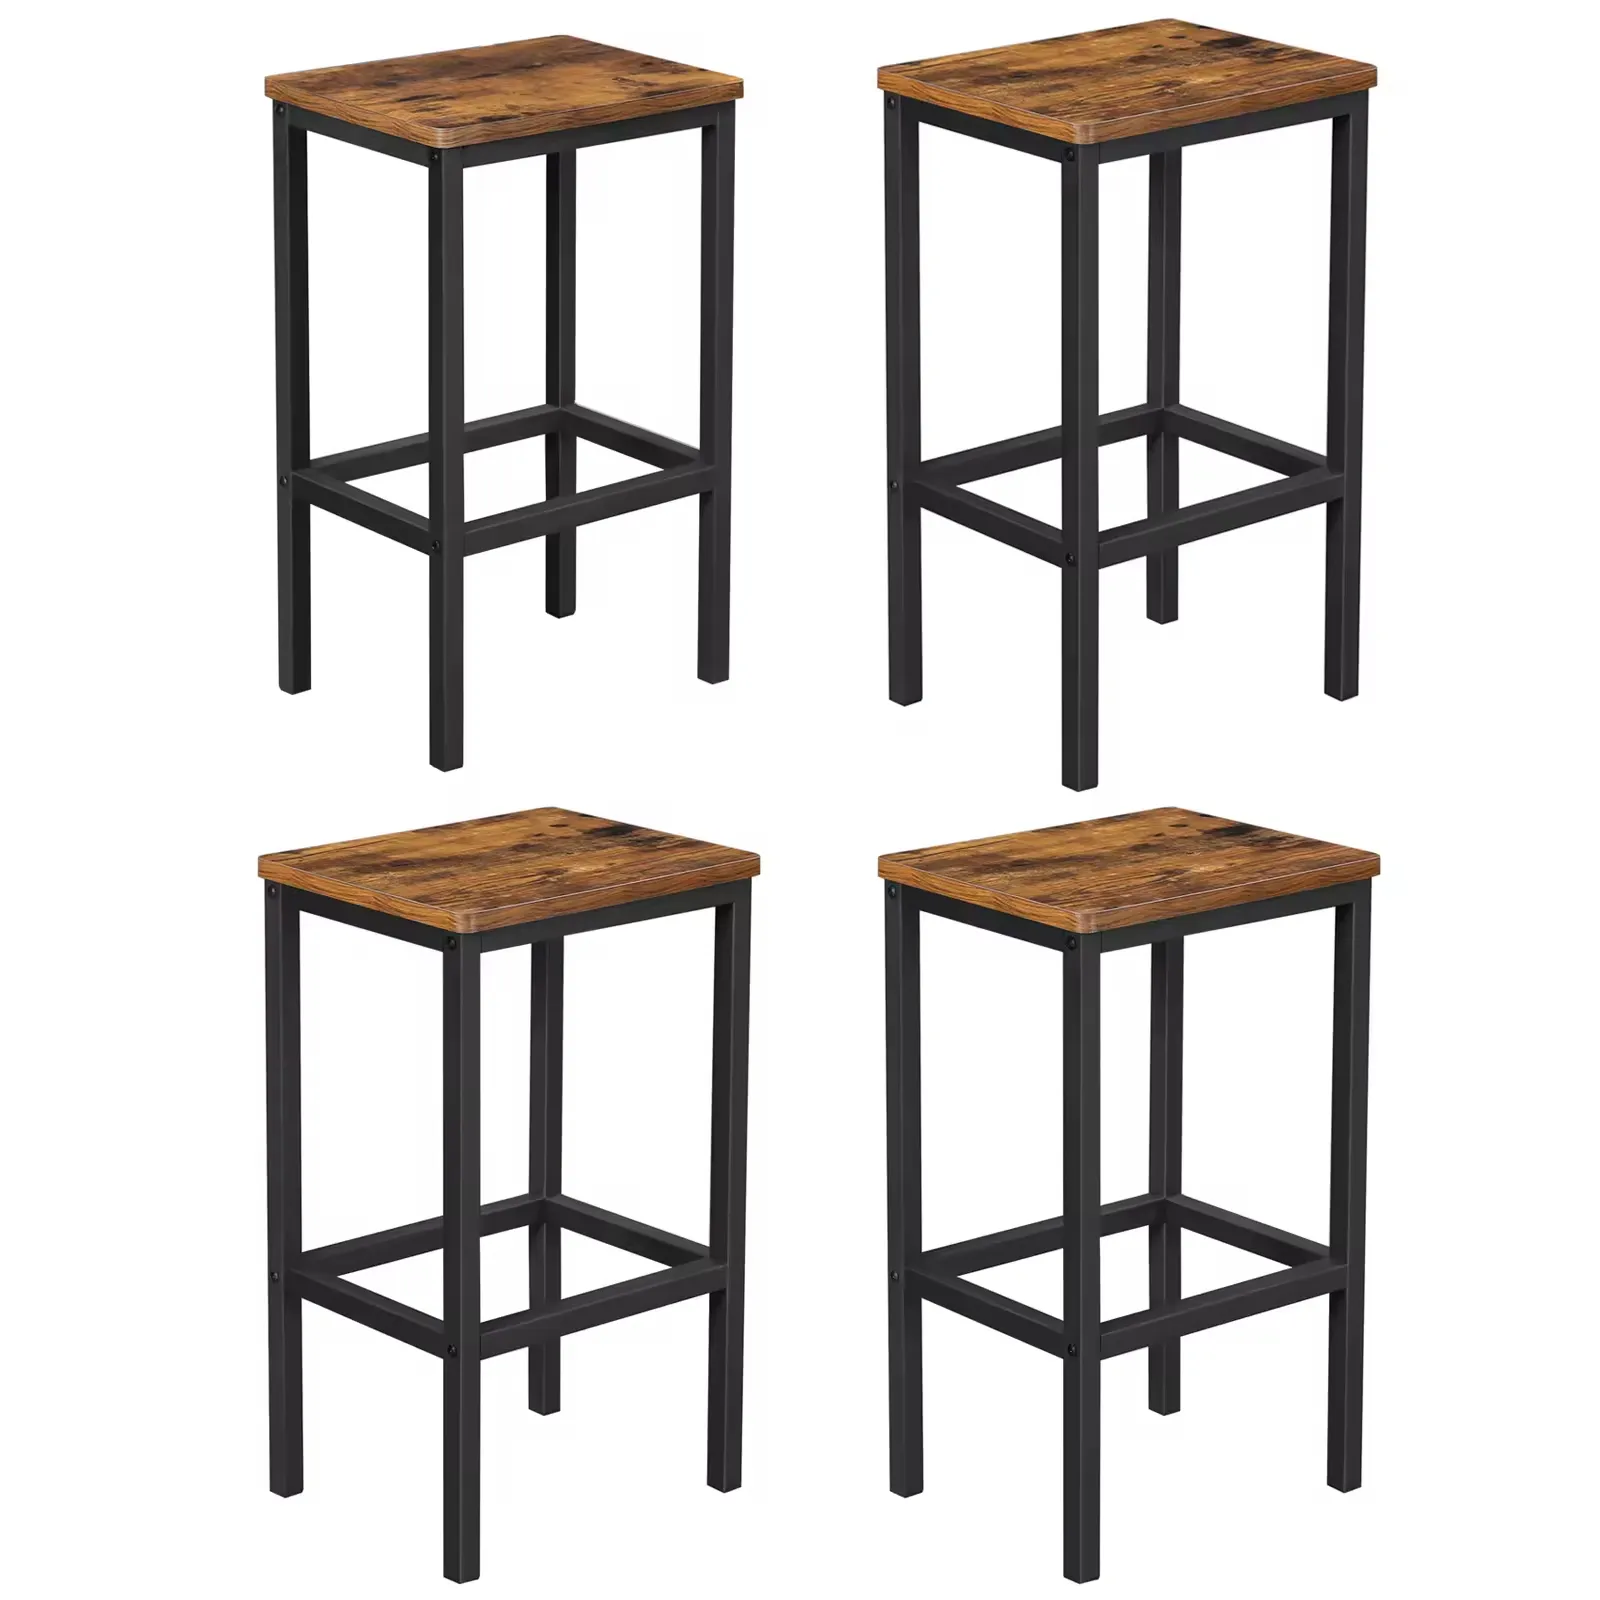 Wholesale Industrial Metal Bar High Chair Counter Stool bar stool for kitchen Restaurant